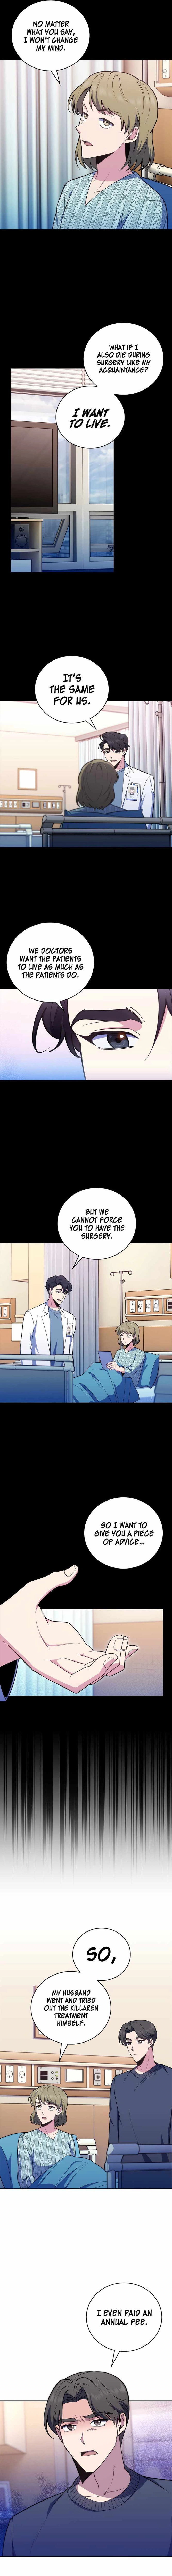 Level-Up Doctor Chapter 82